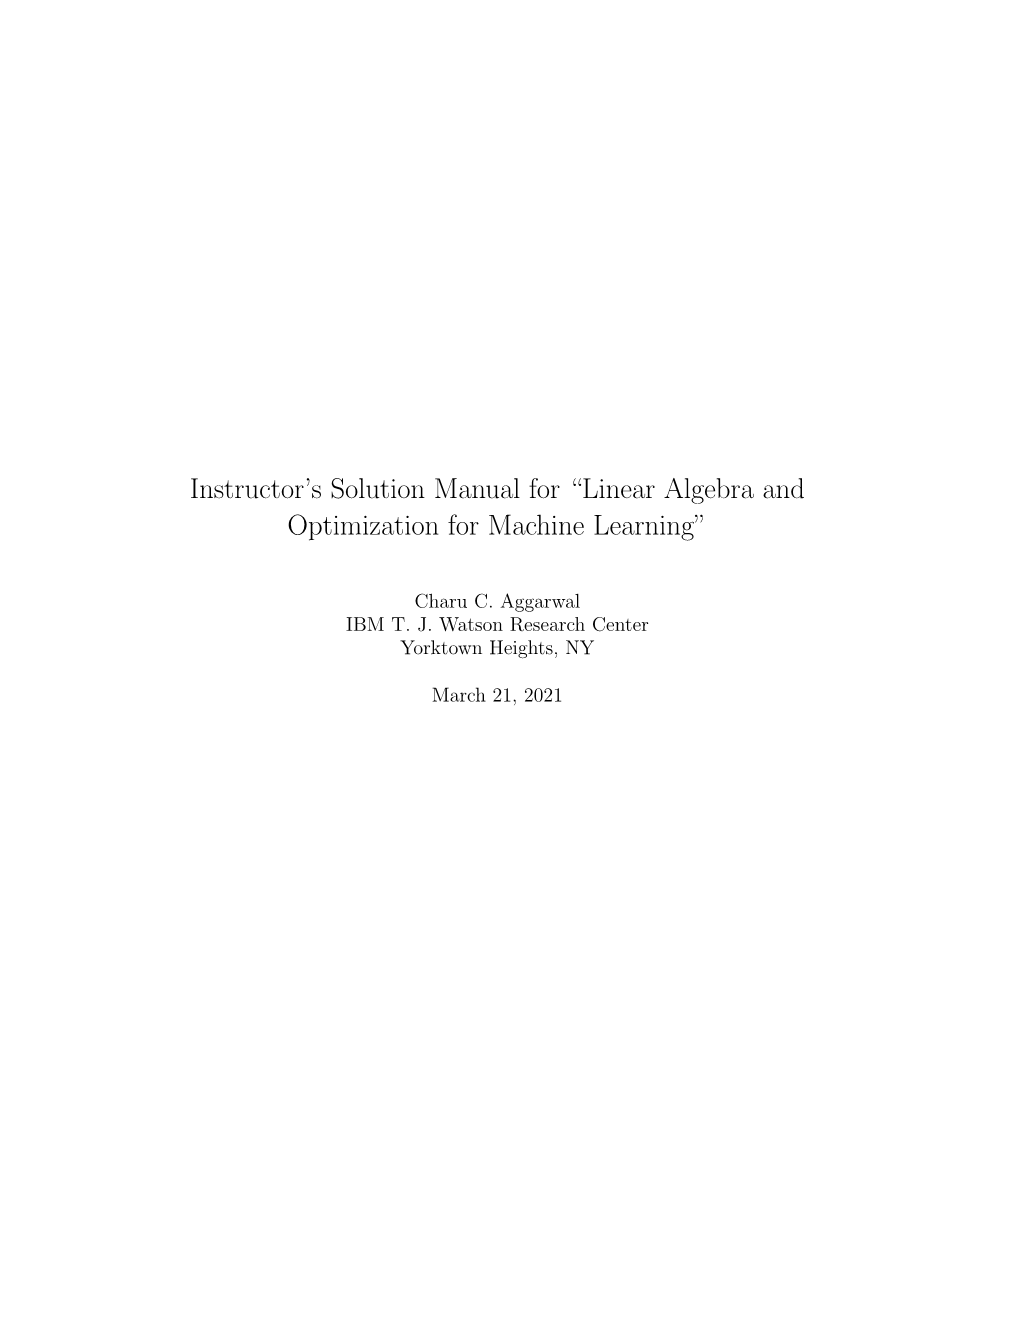 Instructor's Solution Manual for “Linear Algebra and Optimization